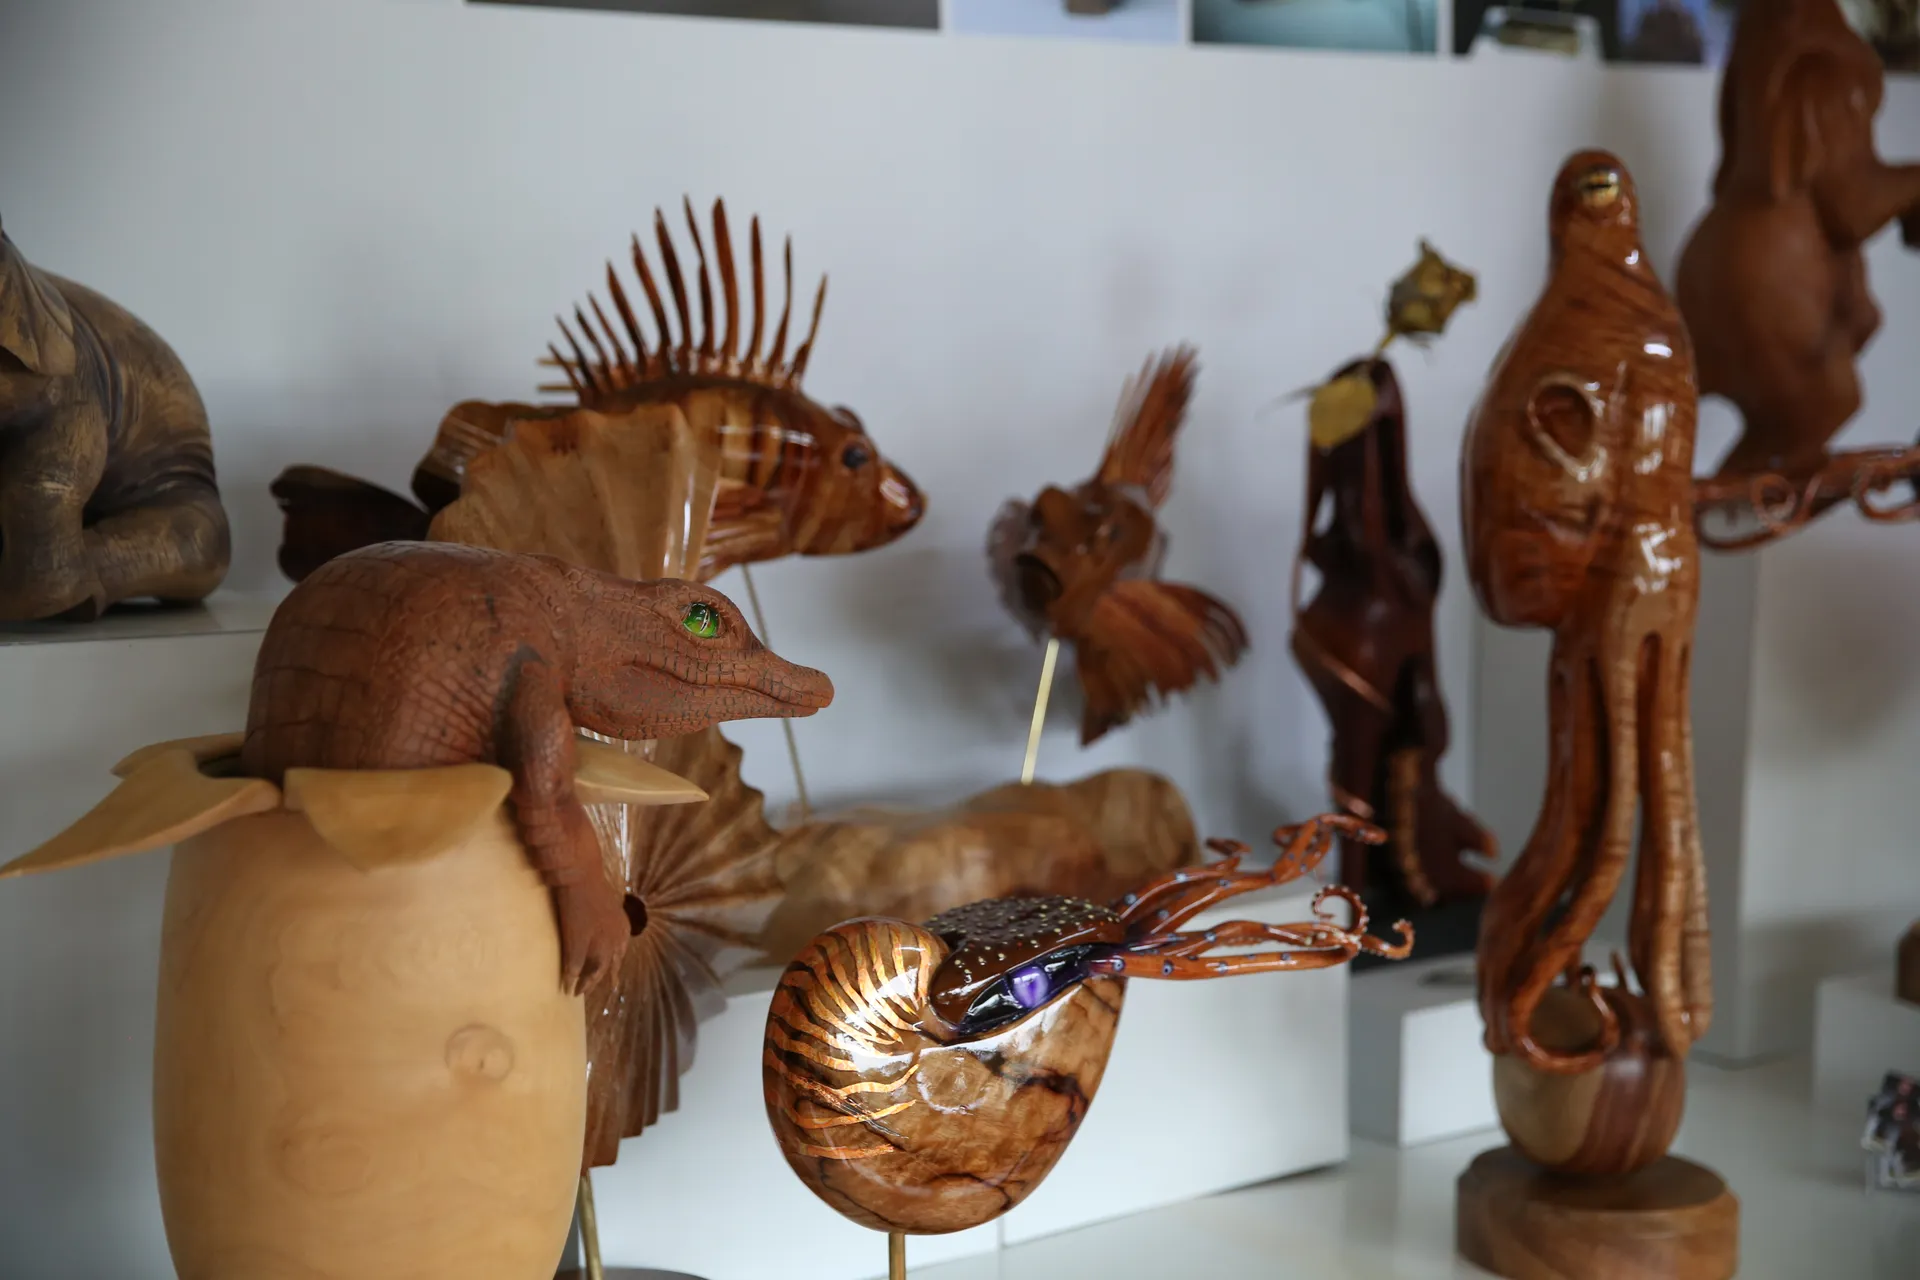 Sculptures on display at the 2023 Maleny Wood Expo by Ollie Hardt - Image by Sound Images